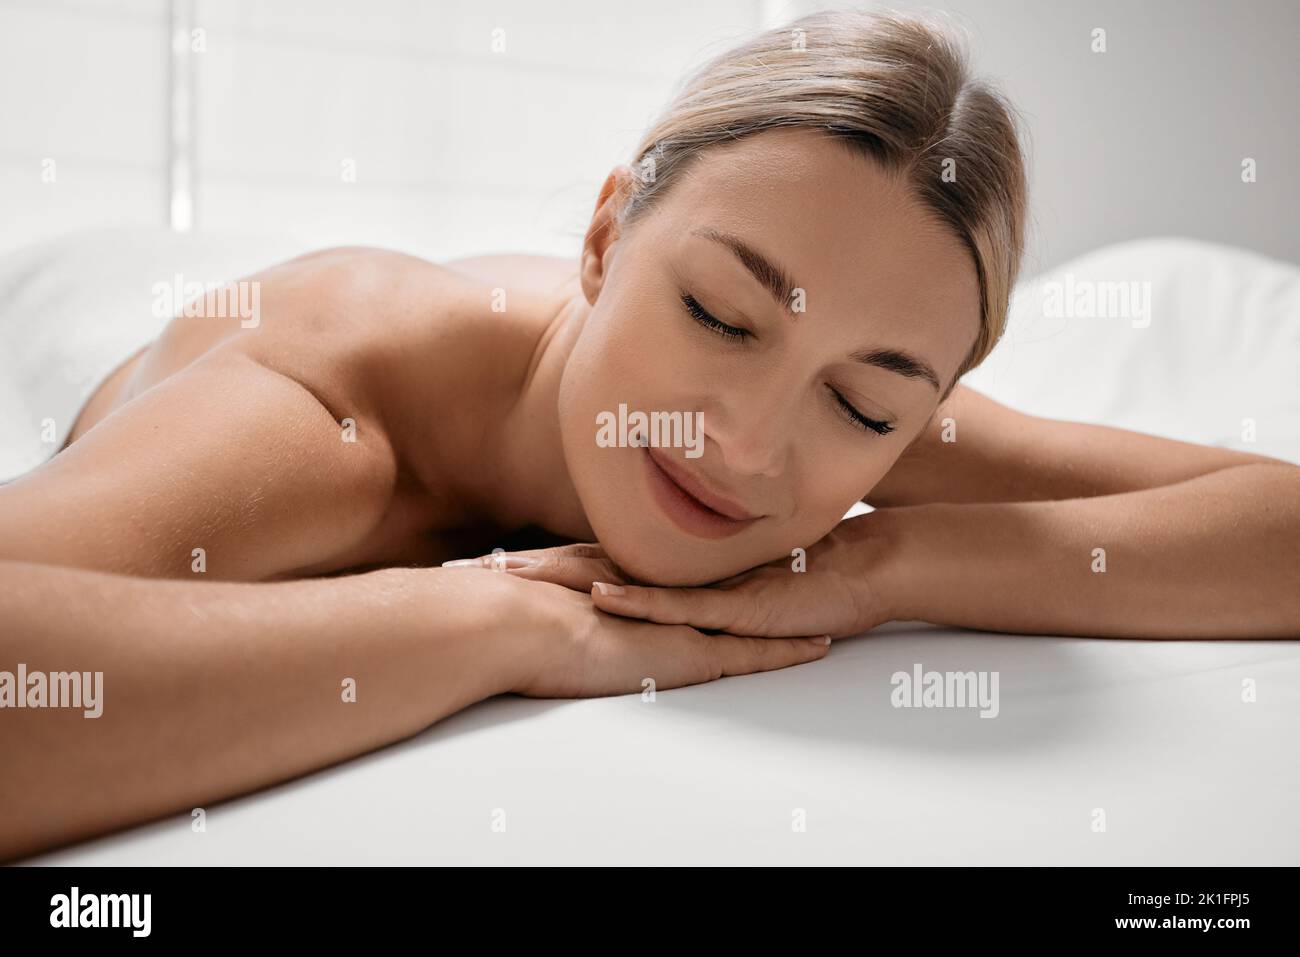 Pretty woman with closed eyes enjoys relaxation lying on massage table after massage and spa treatments Stock Photo